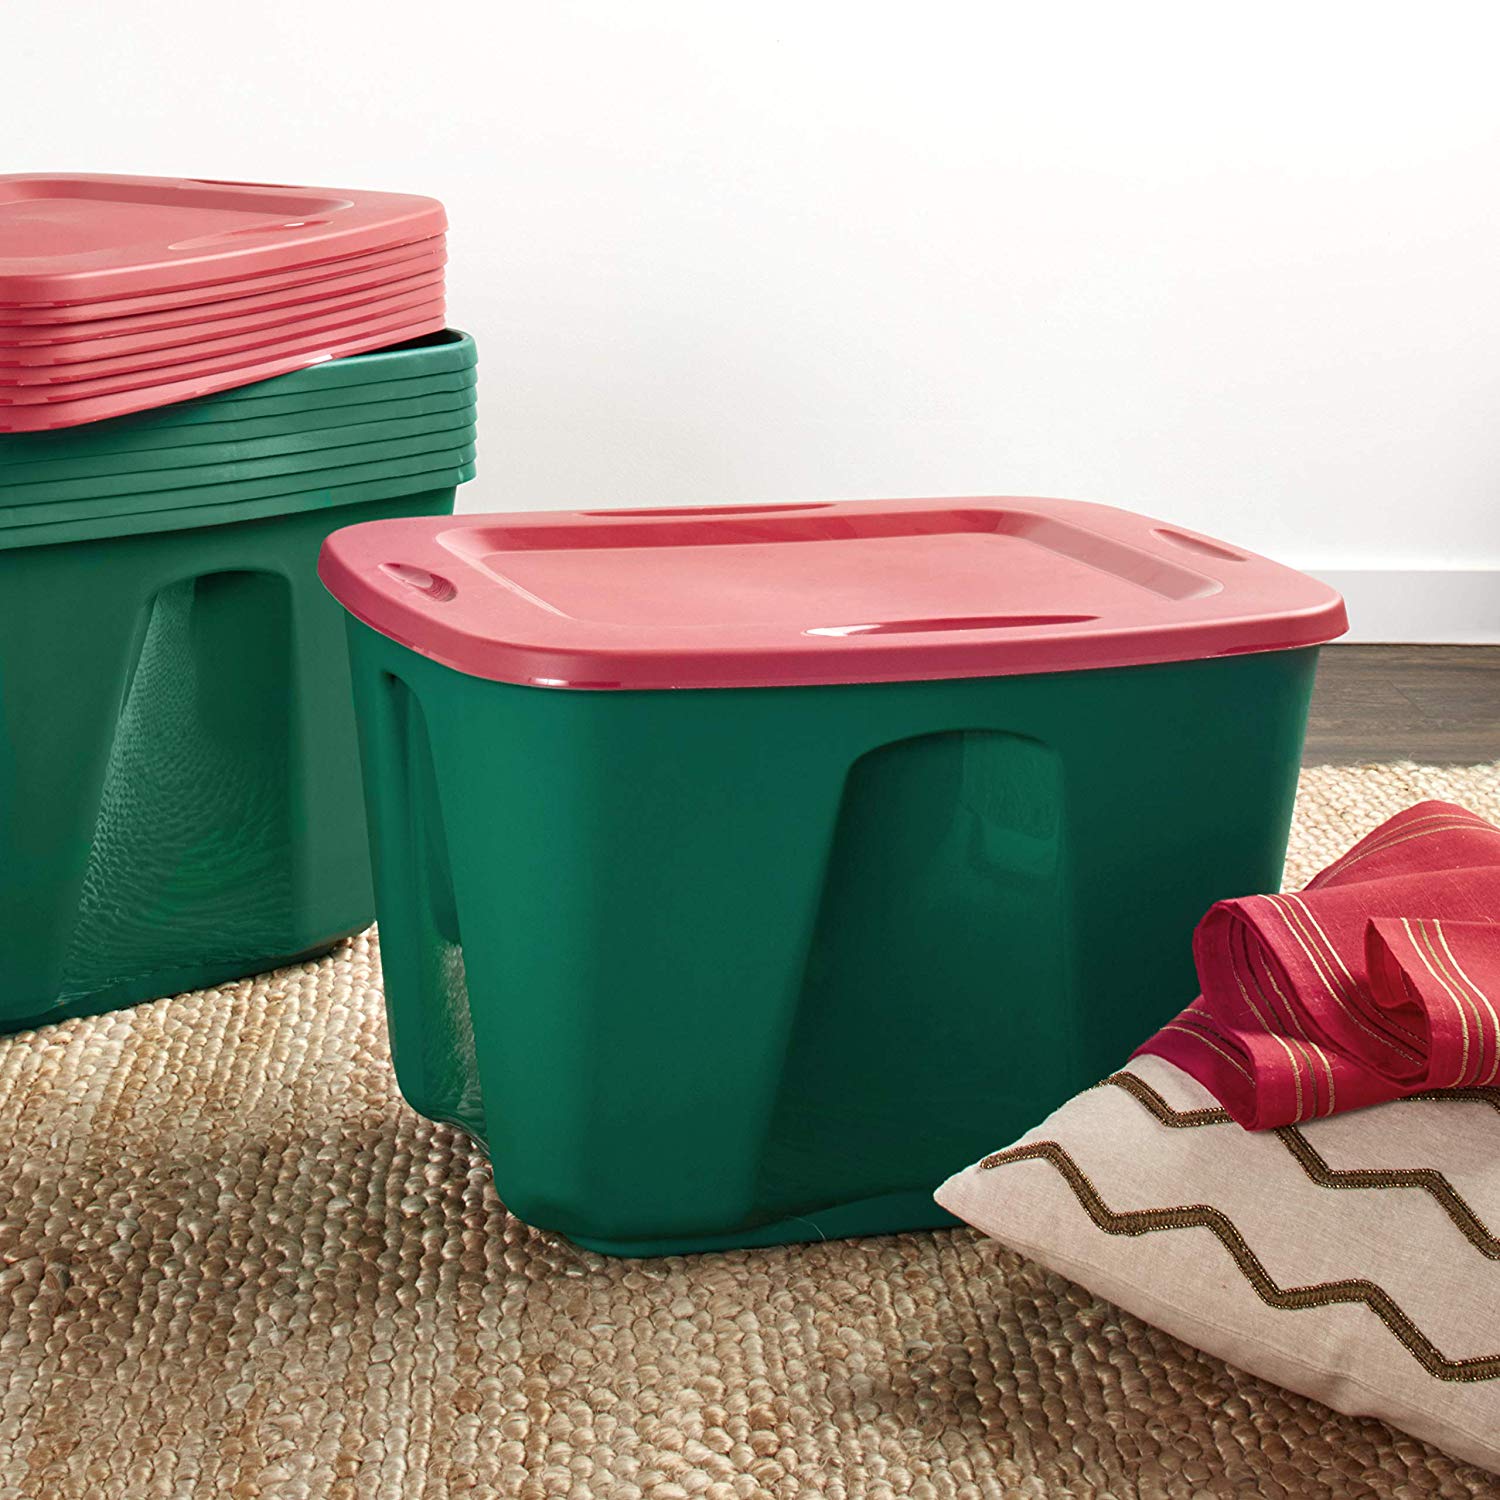 Hefty 18 Gallon Plastic Storage Tote with HIRISE Lid, Holiday Green, Set of  6 